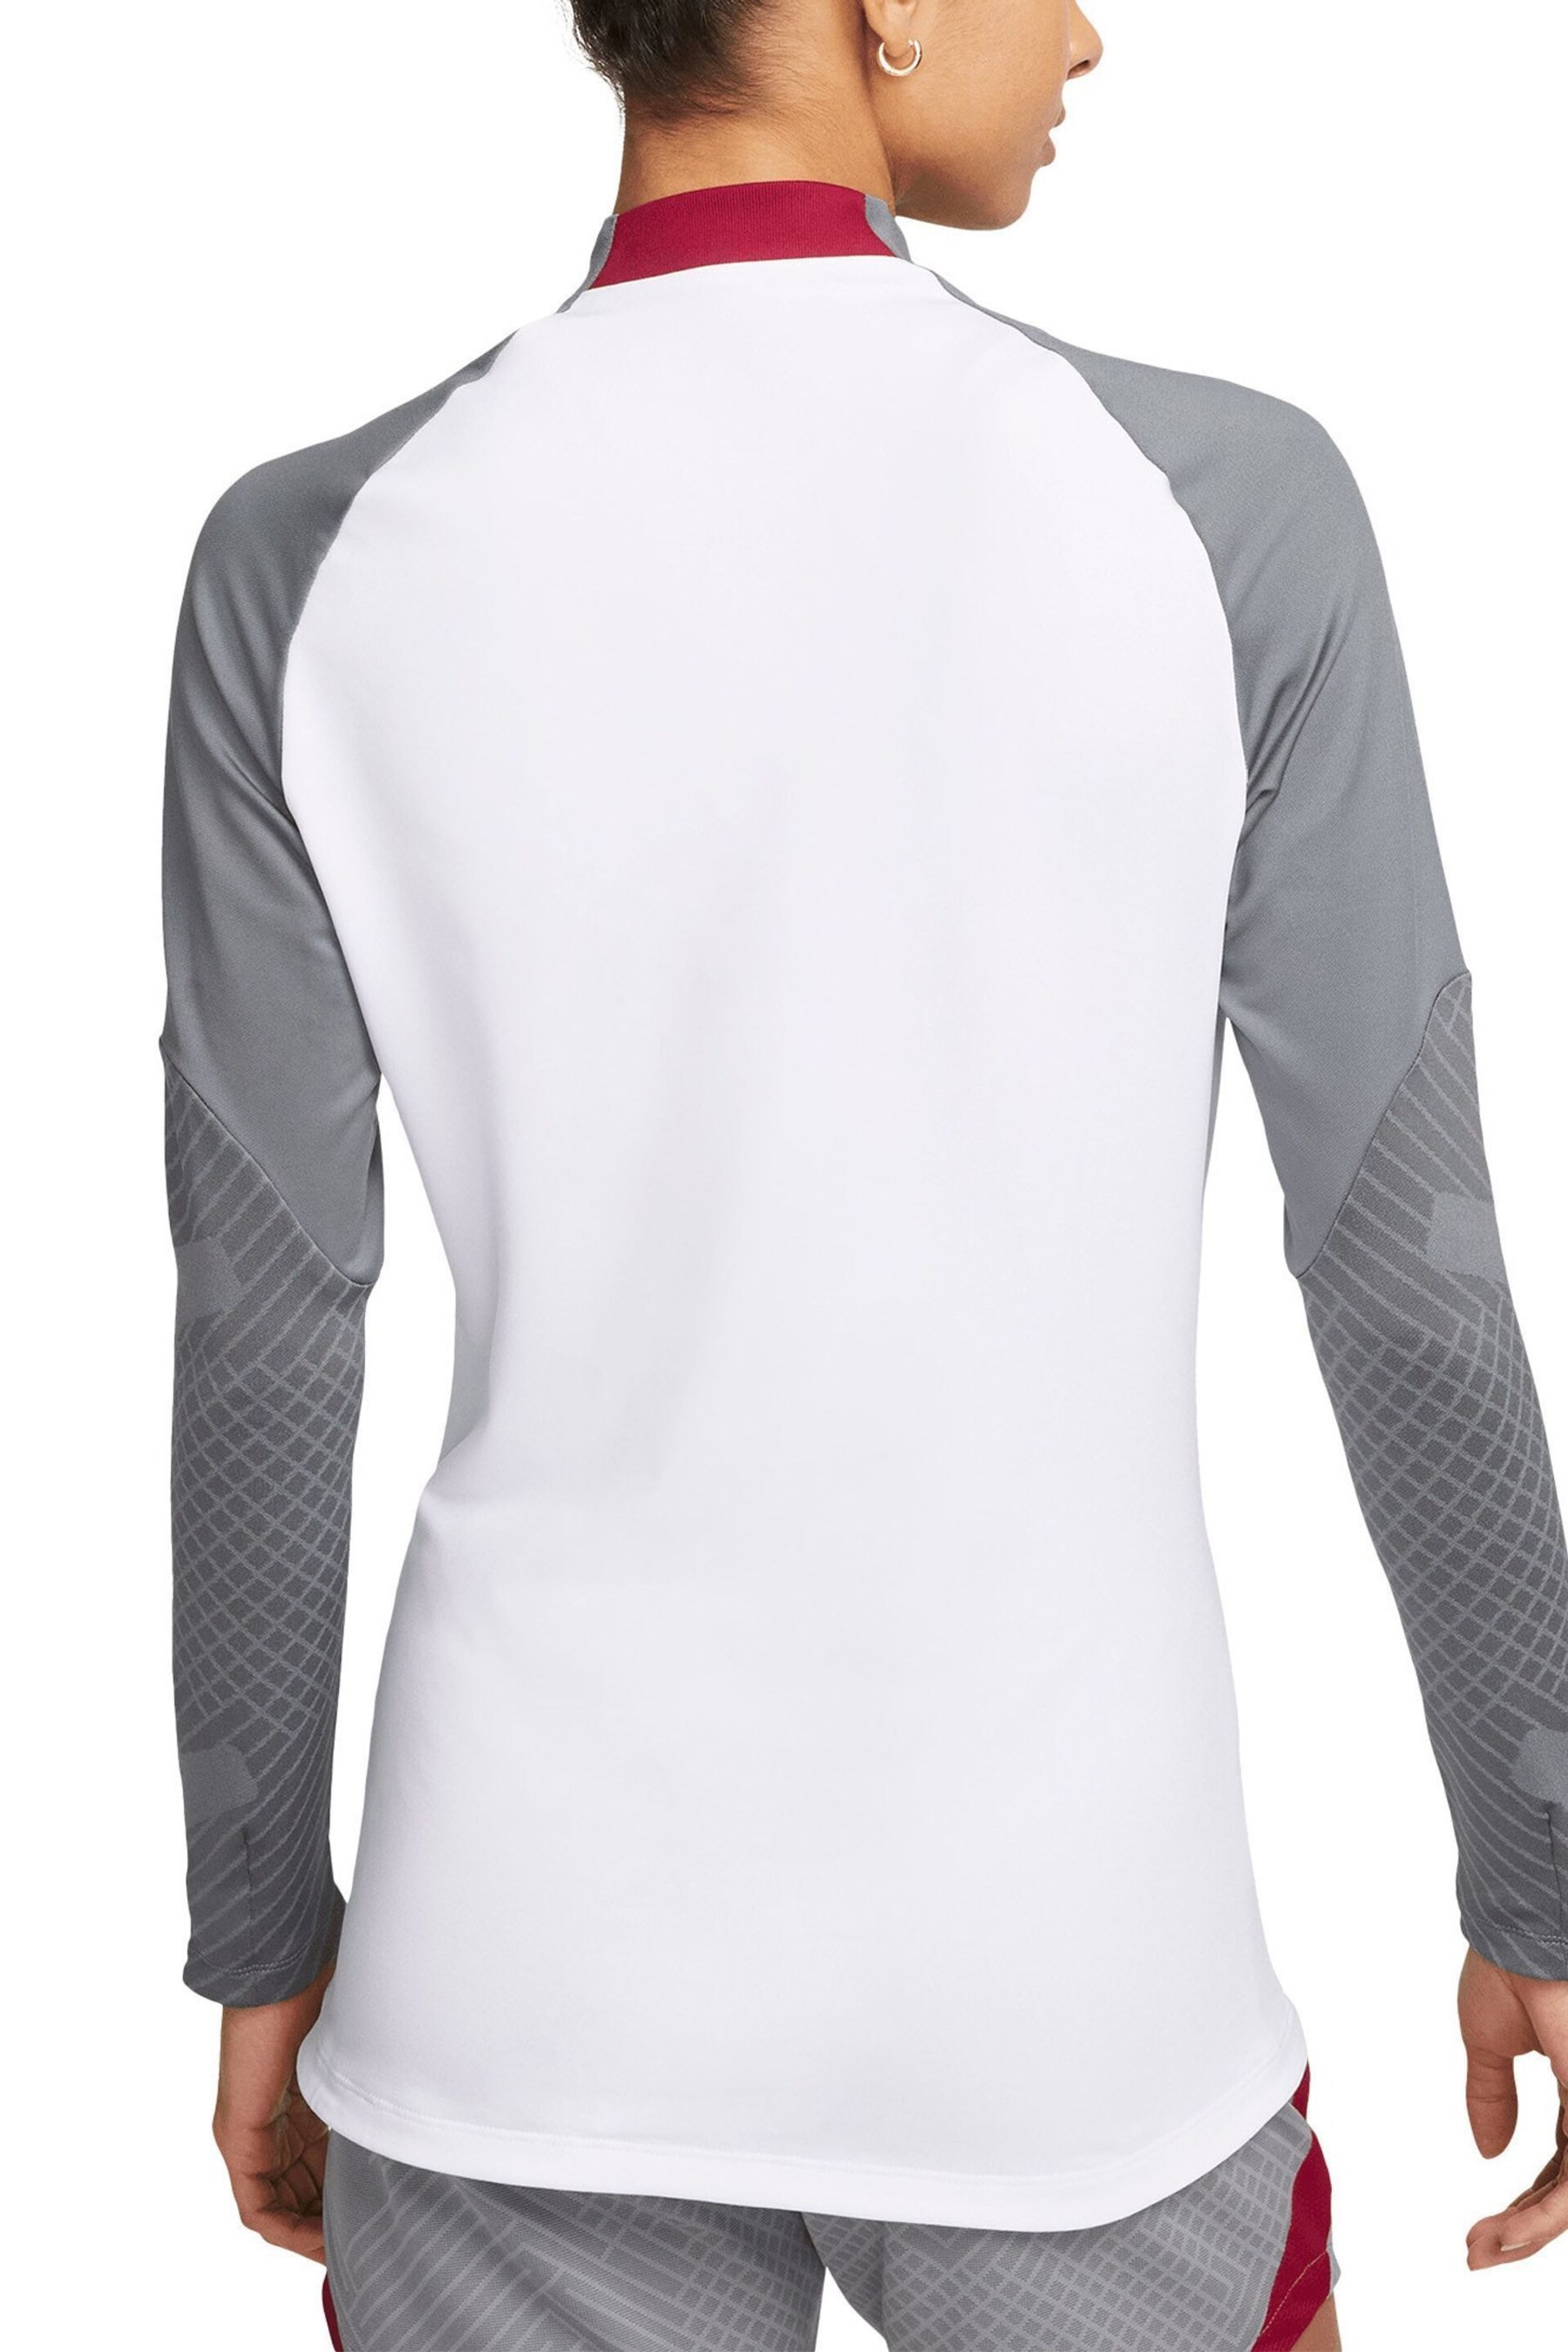 Nike White Liverpool Strike Drill Top Womens - Image 2 of 2